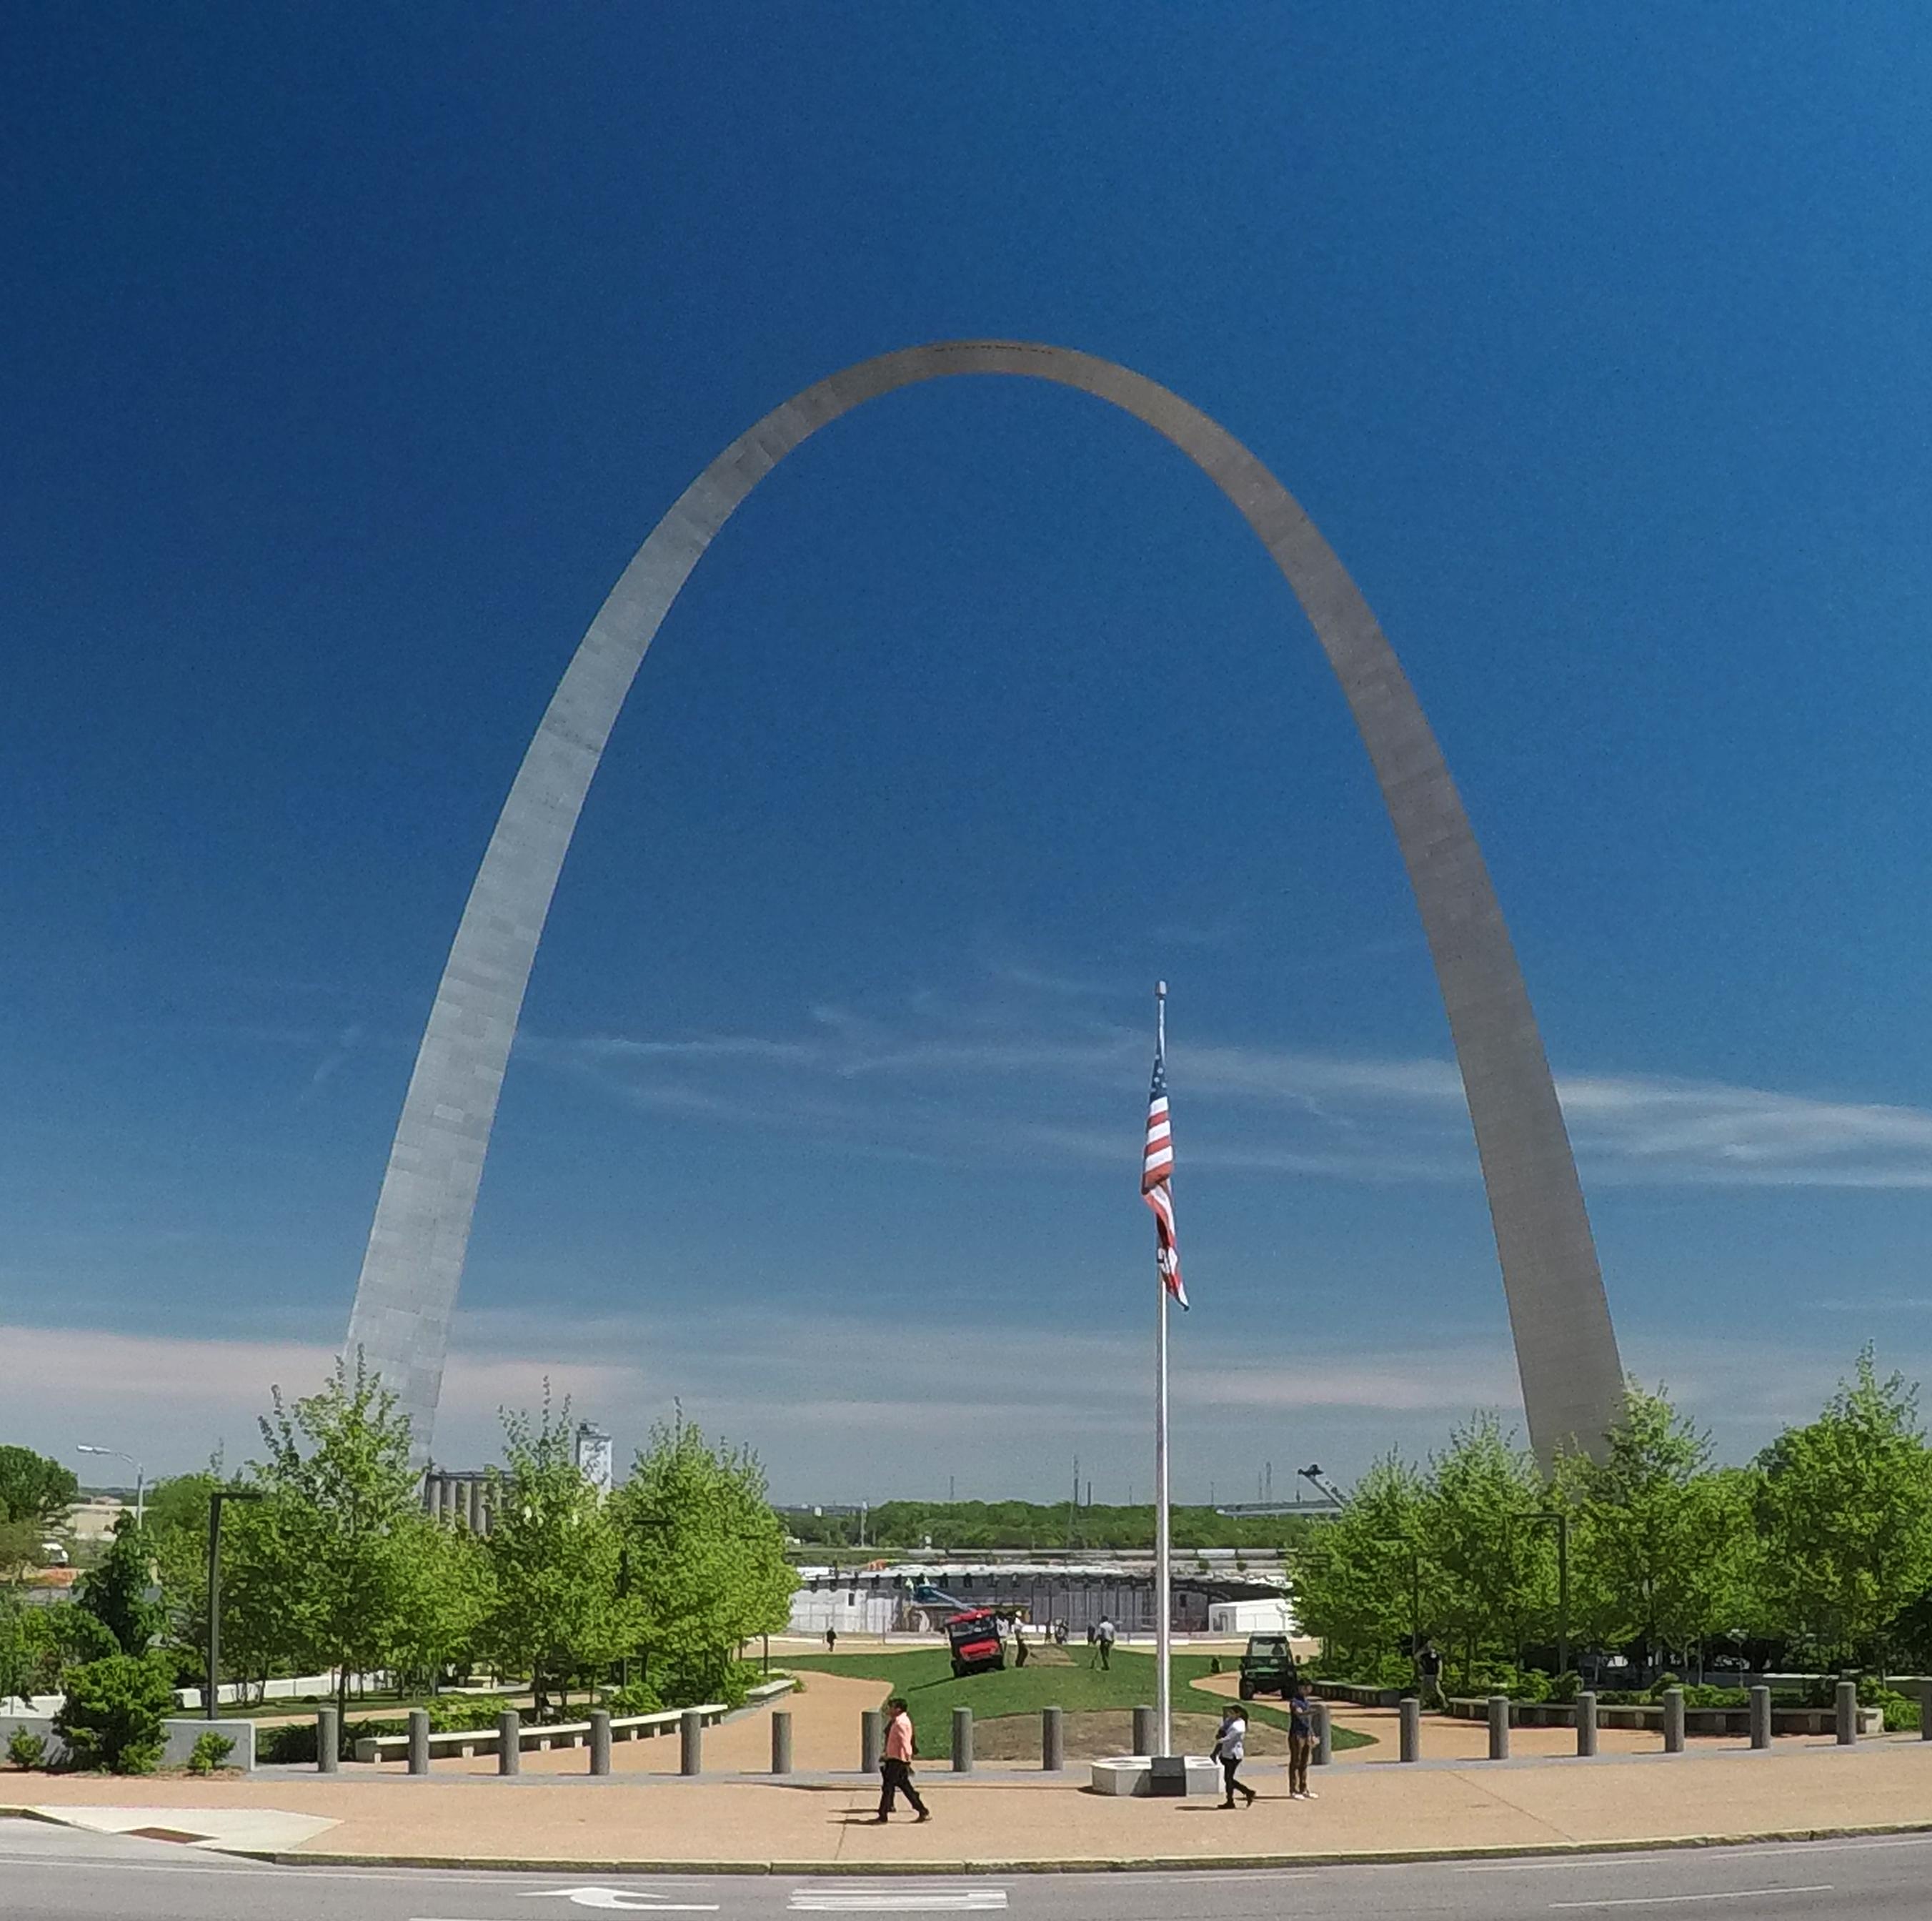 West Entrance to the Gateway Arch Visitor Center